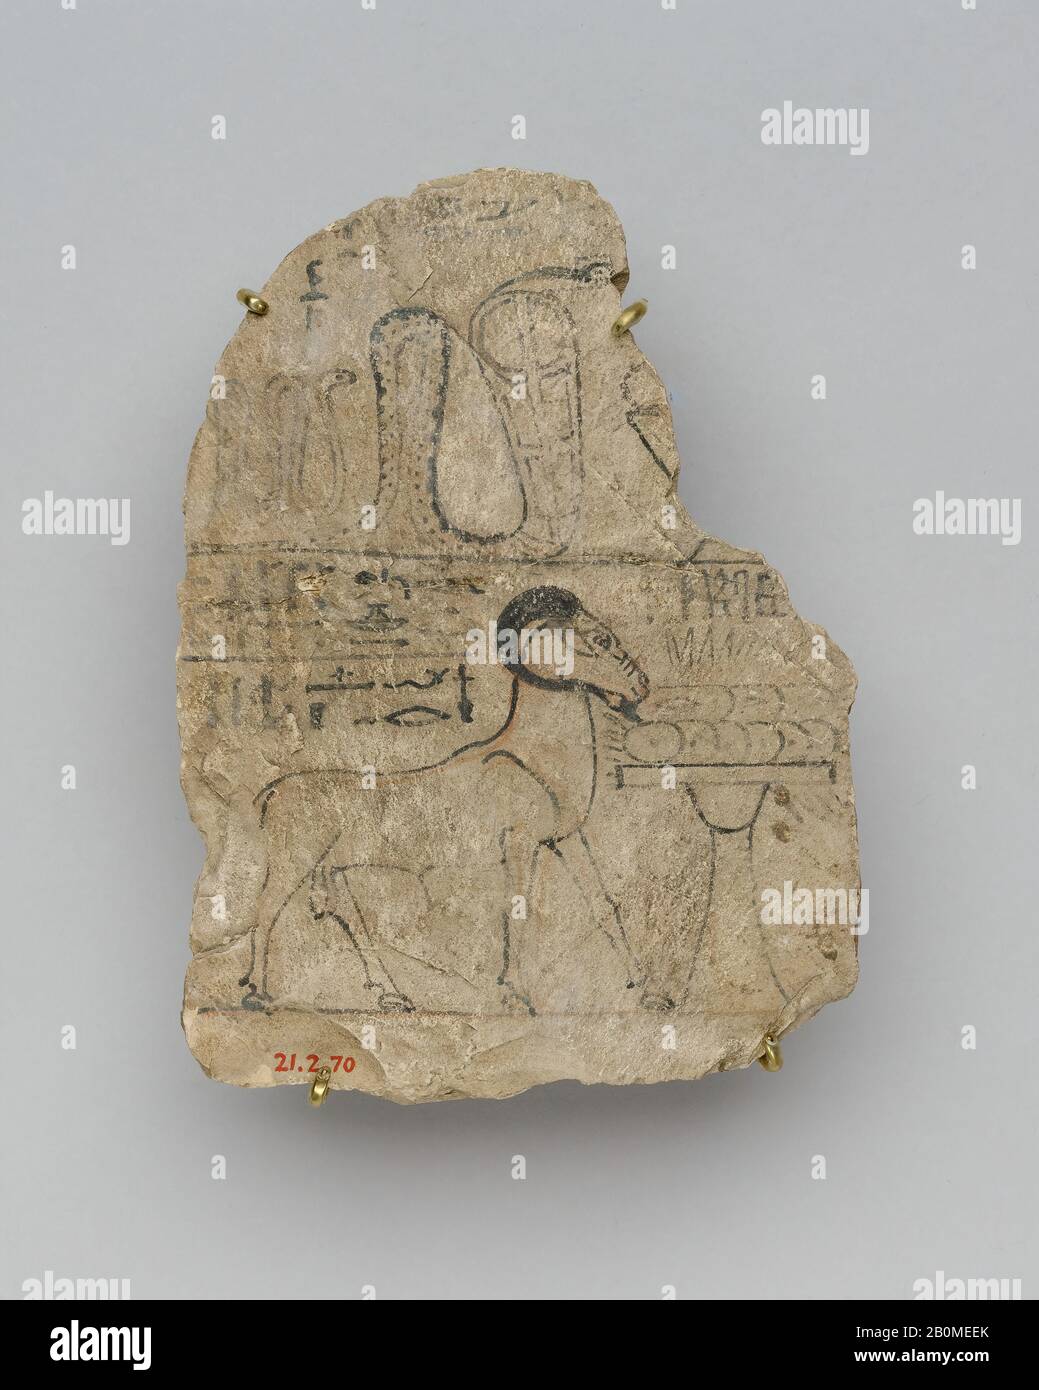 Artist's Sketch, New Kingdom, Ramesside, Dynasty 19–20, ca. 1295–1070 B.C., From Egypt; Probably from Upper Egypt, Thebes, Valley of the Kings, Limestone, ink, H. 14.3 cm (5 5/8 in.), w. 10.5 cm (4 1/8 in Stock Photo